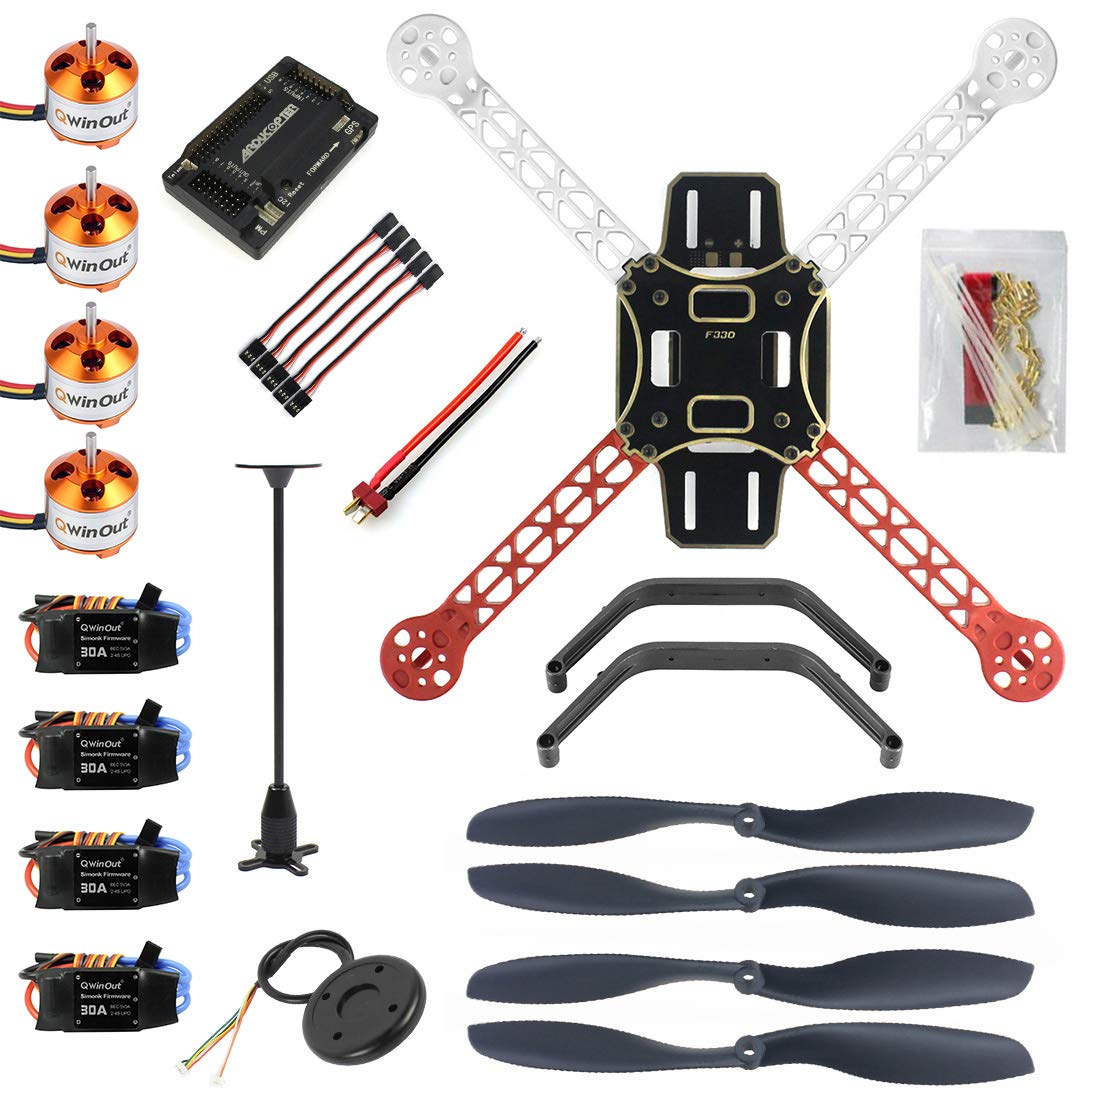 QWinOut 330mm DIY RC Drone Kit F330 Frame RC Quadcopter 4-Axle UFO Unassembly Kit 6M GPS APM2.8 Flight Control for Beginners (No Battery and Remote Controller)